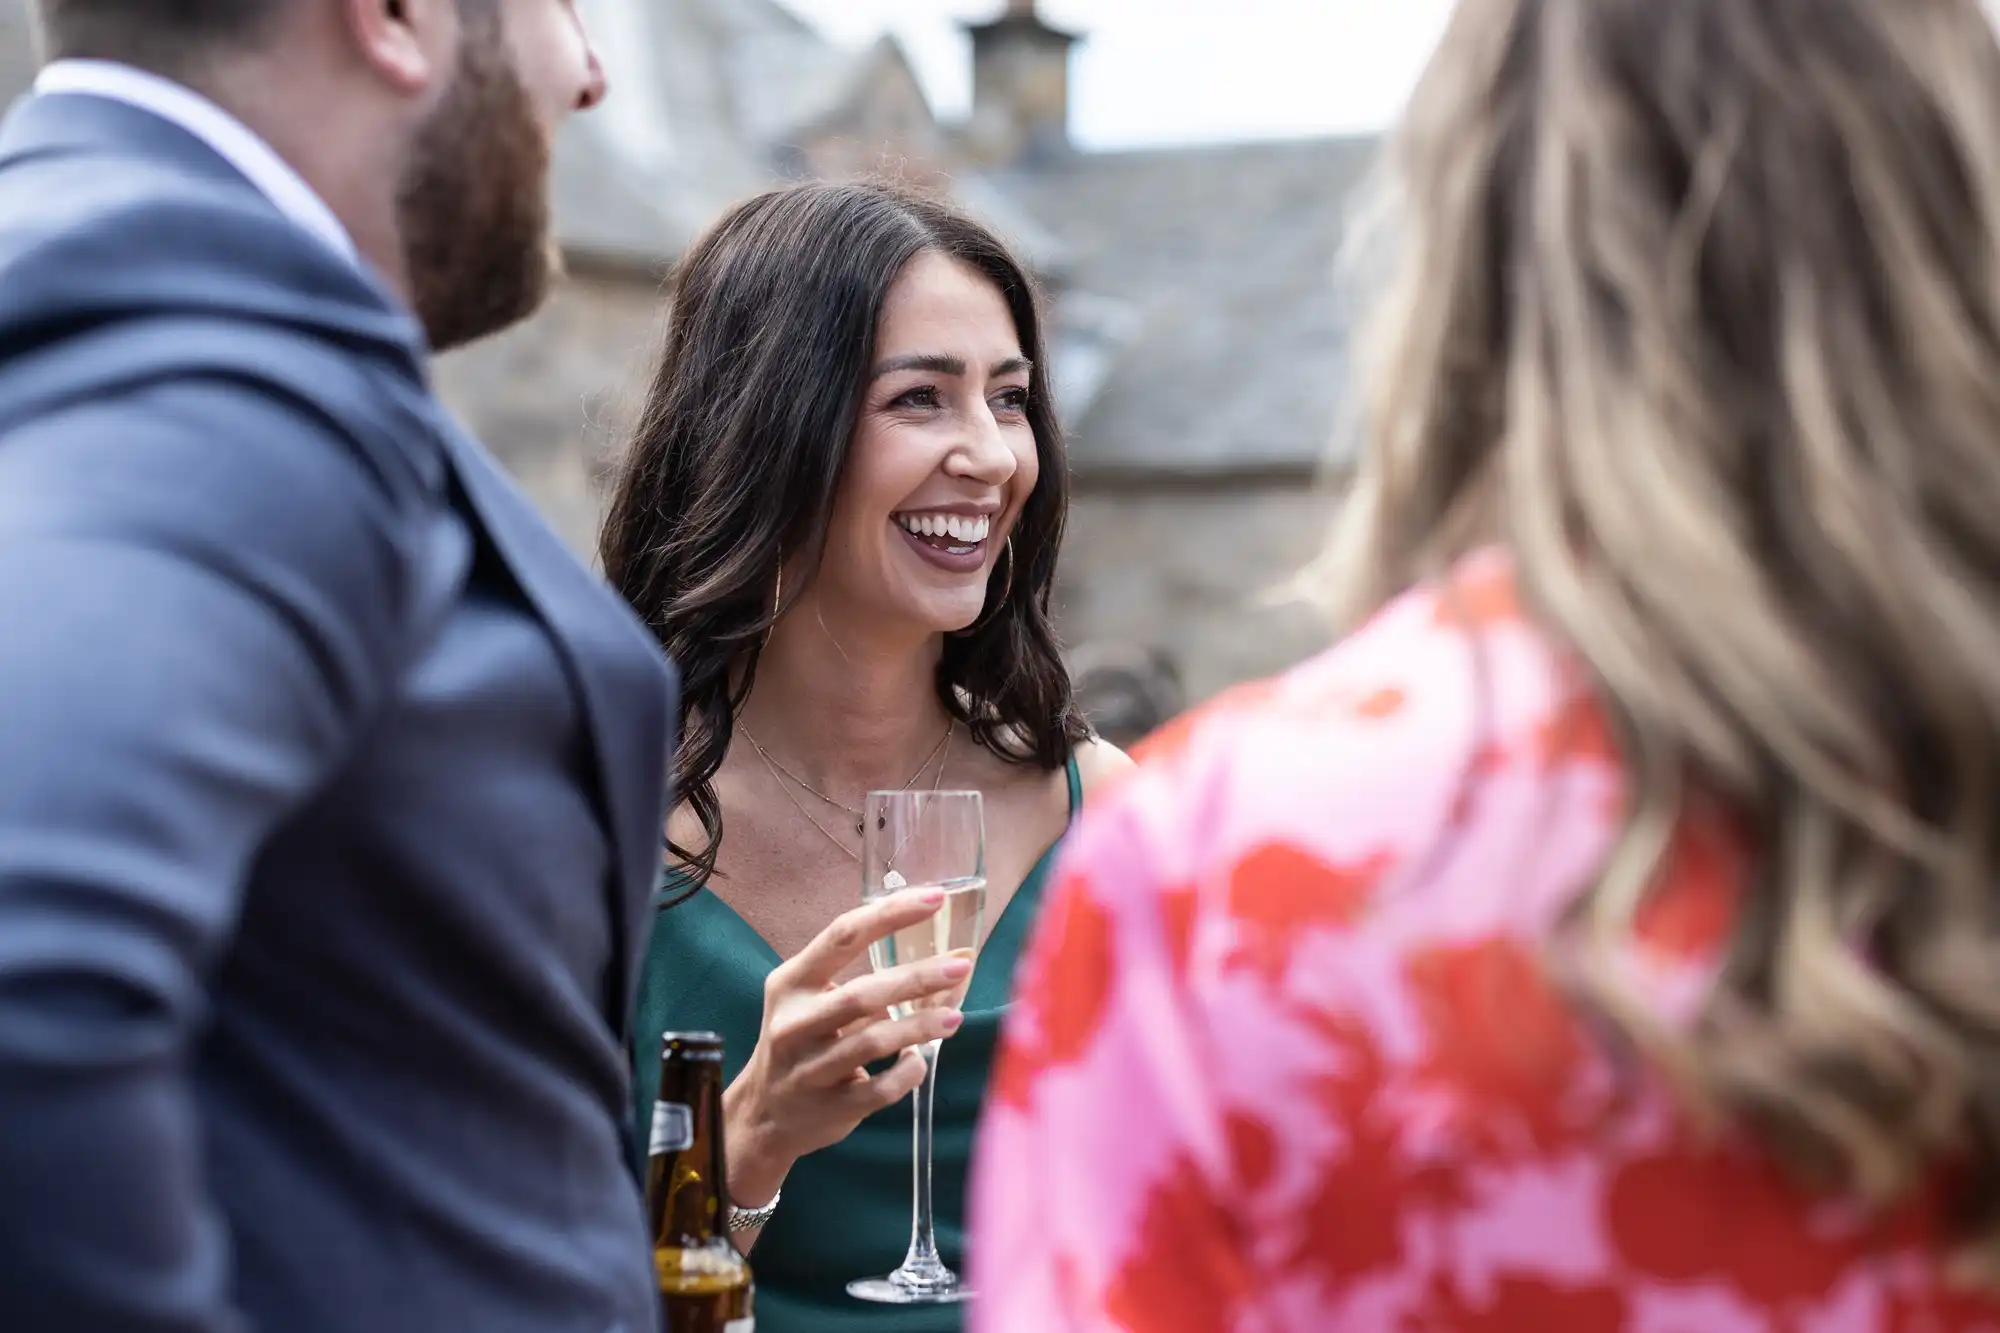 Woman in green dress laughing and holding a champagne glass at an outdoor social gathering.